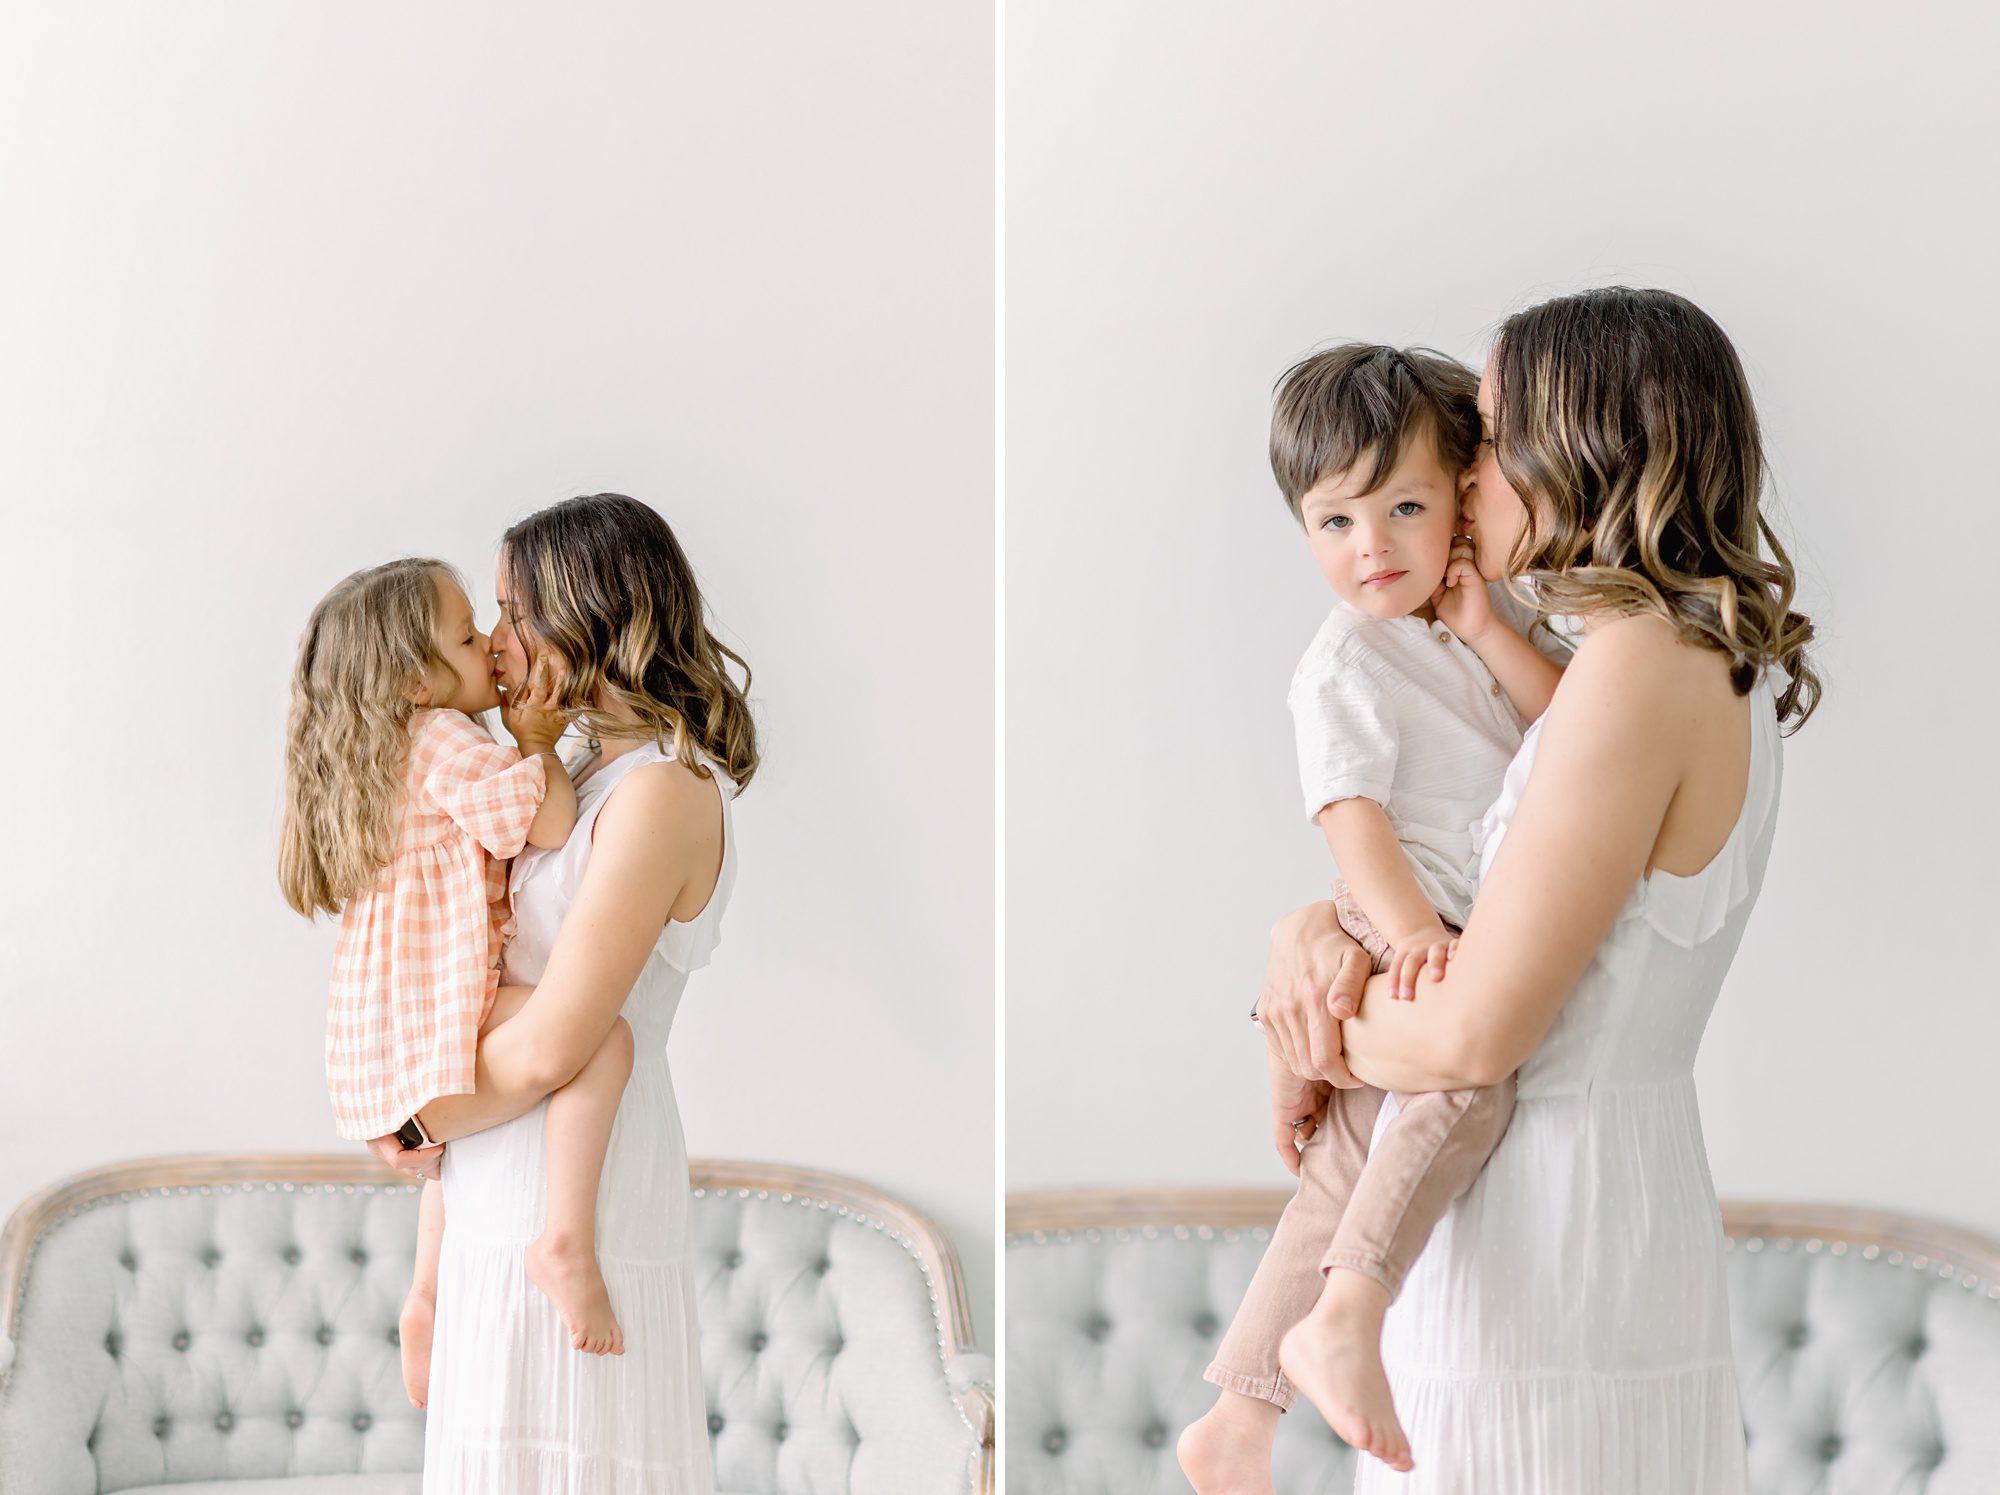 A summary of 2021's Mother's Day Mini Session Event in Studio in Centennial, Colorado.